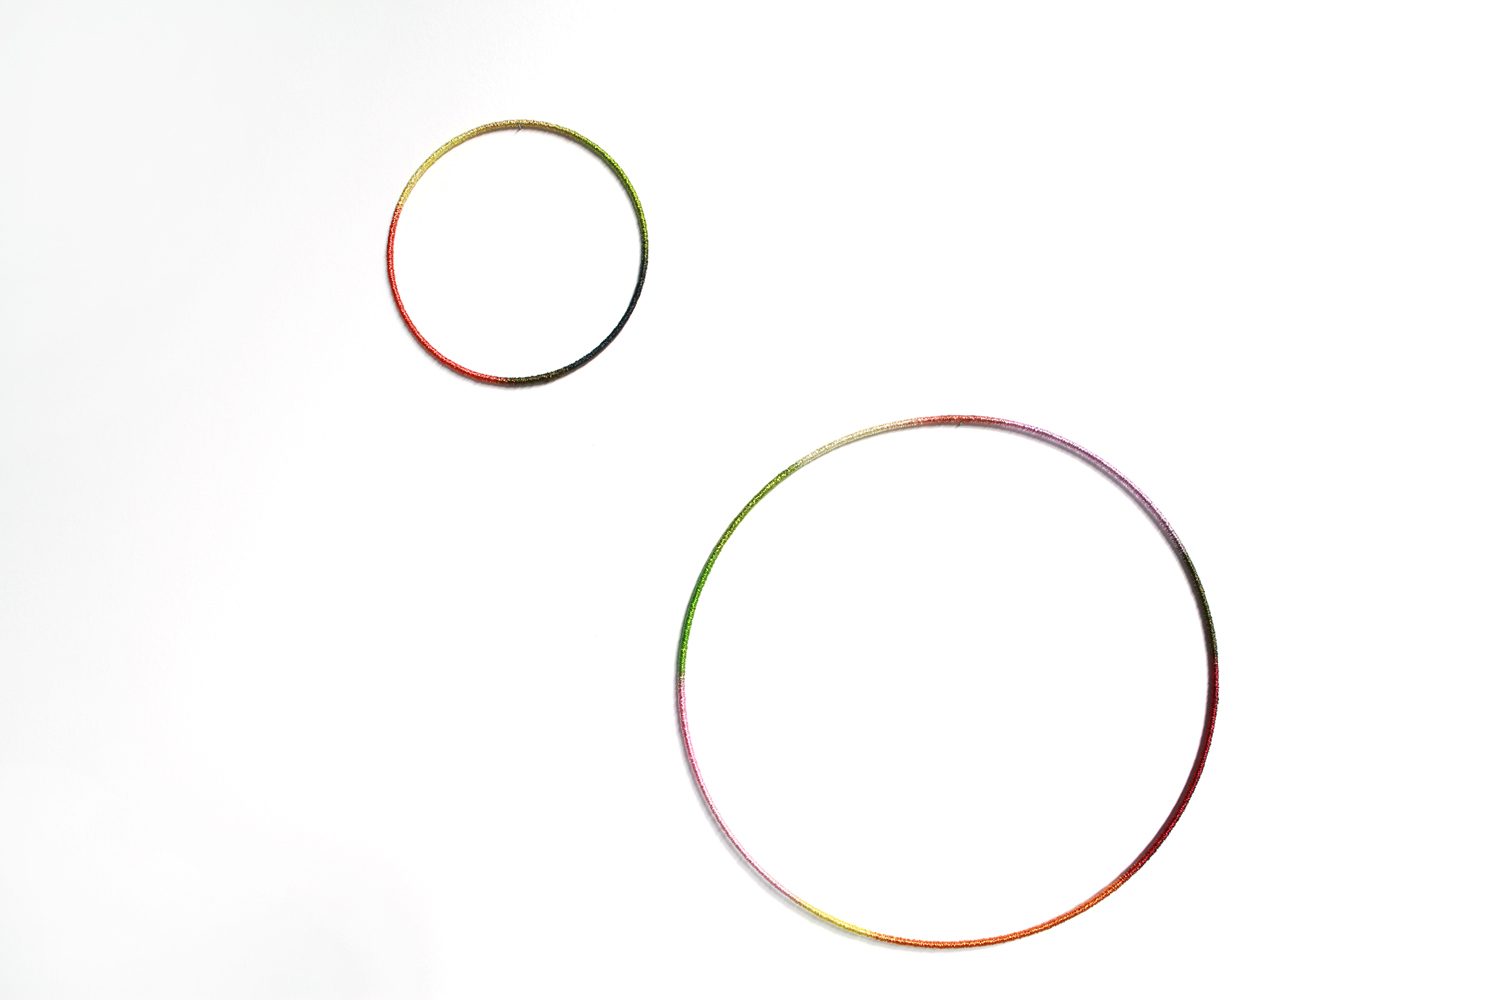    ring , 2012, wire, metal, dimensions variable   Extended Drawing, 2012, CAB, Brussels 